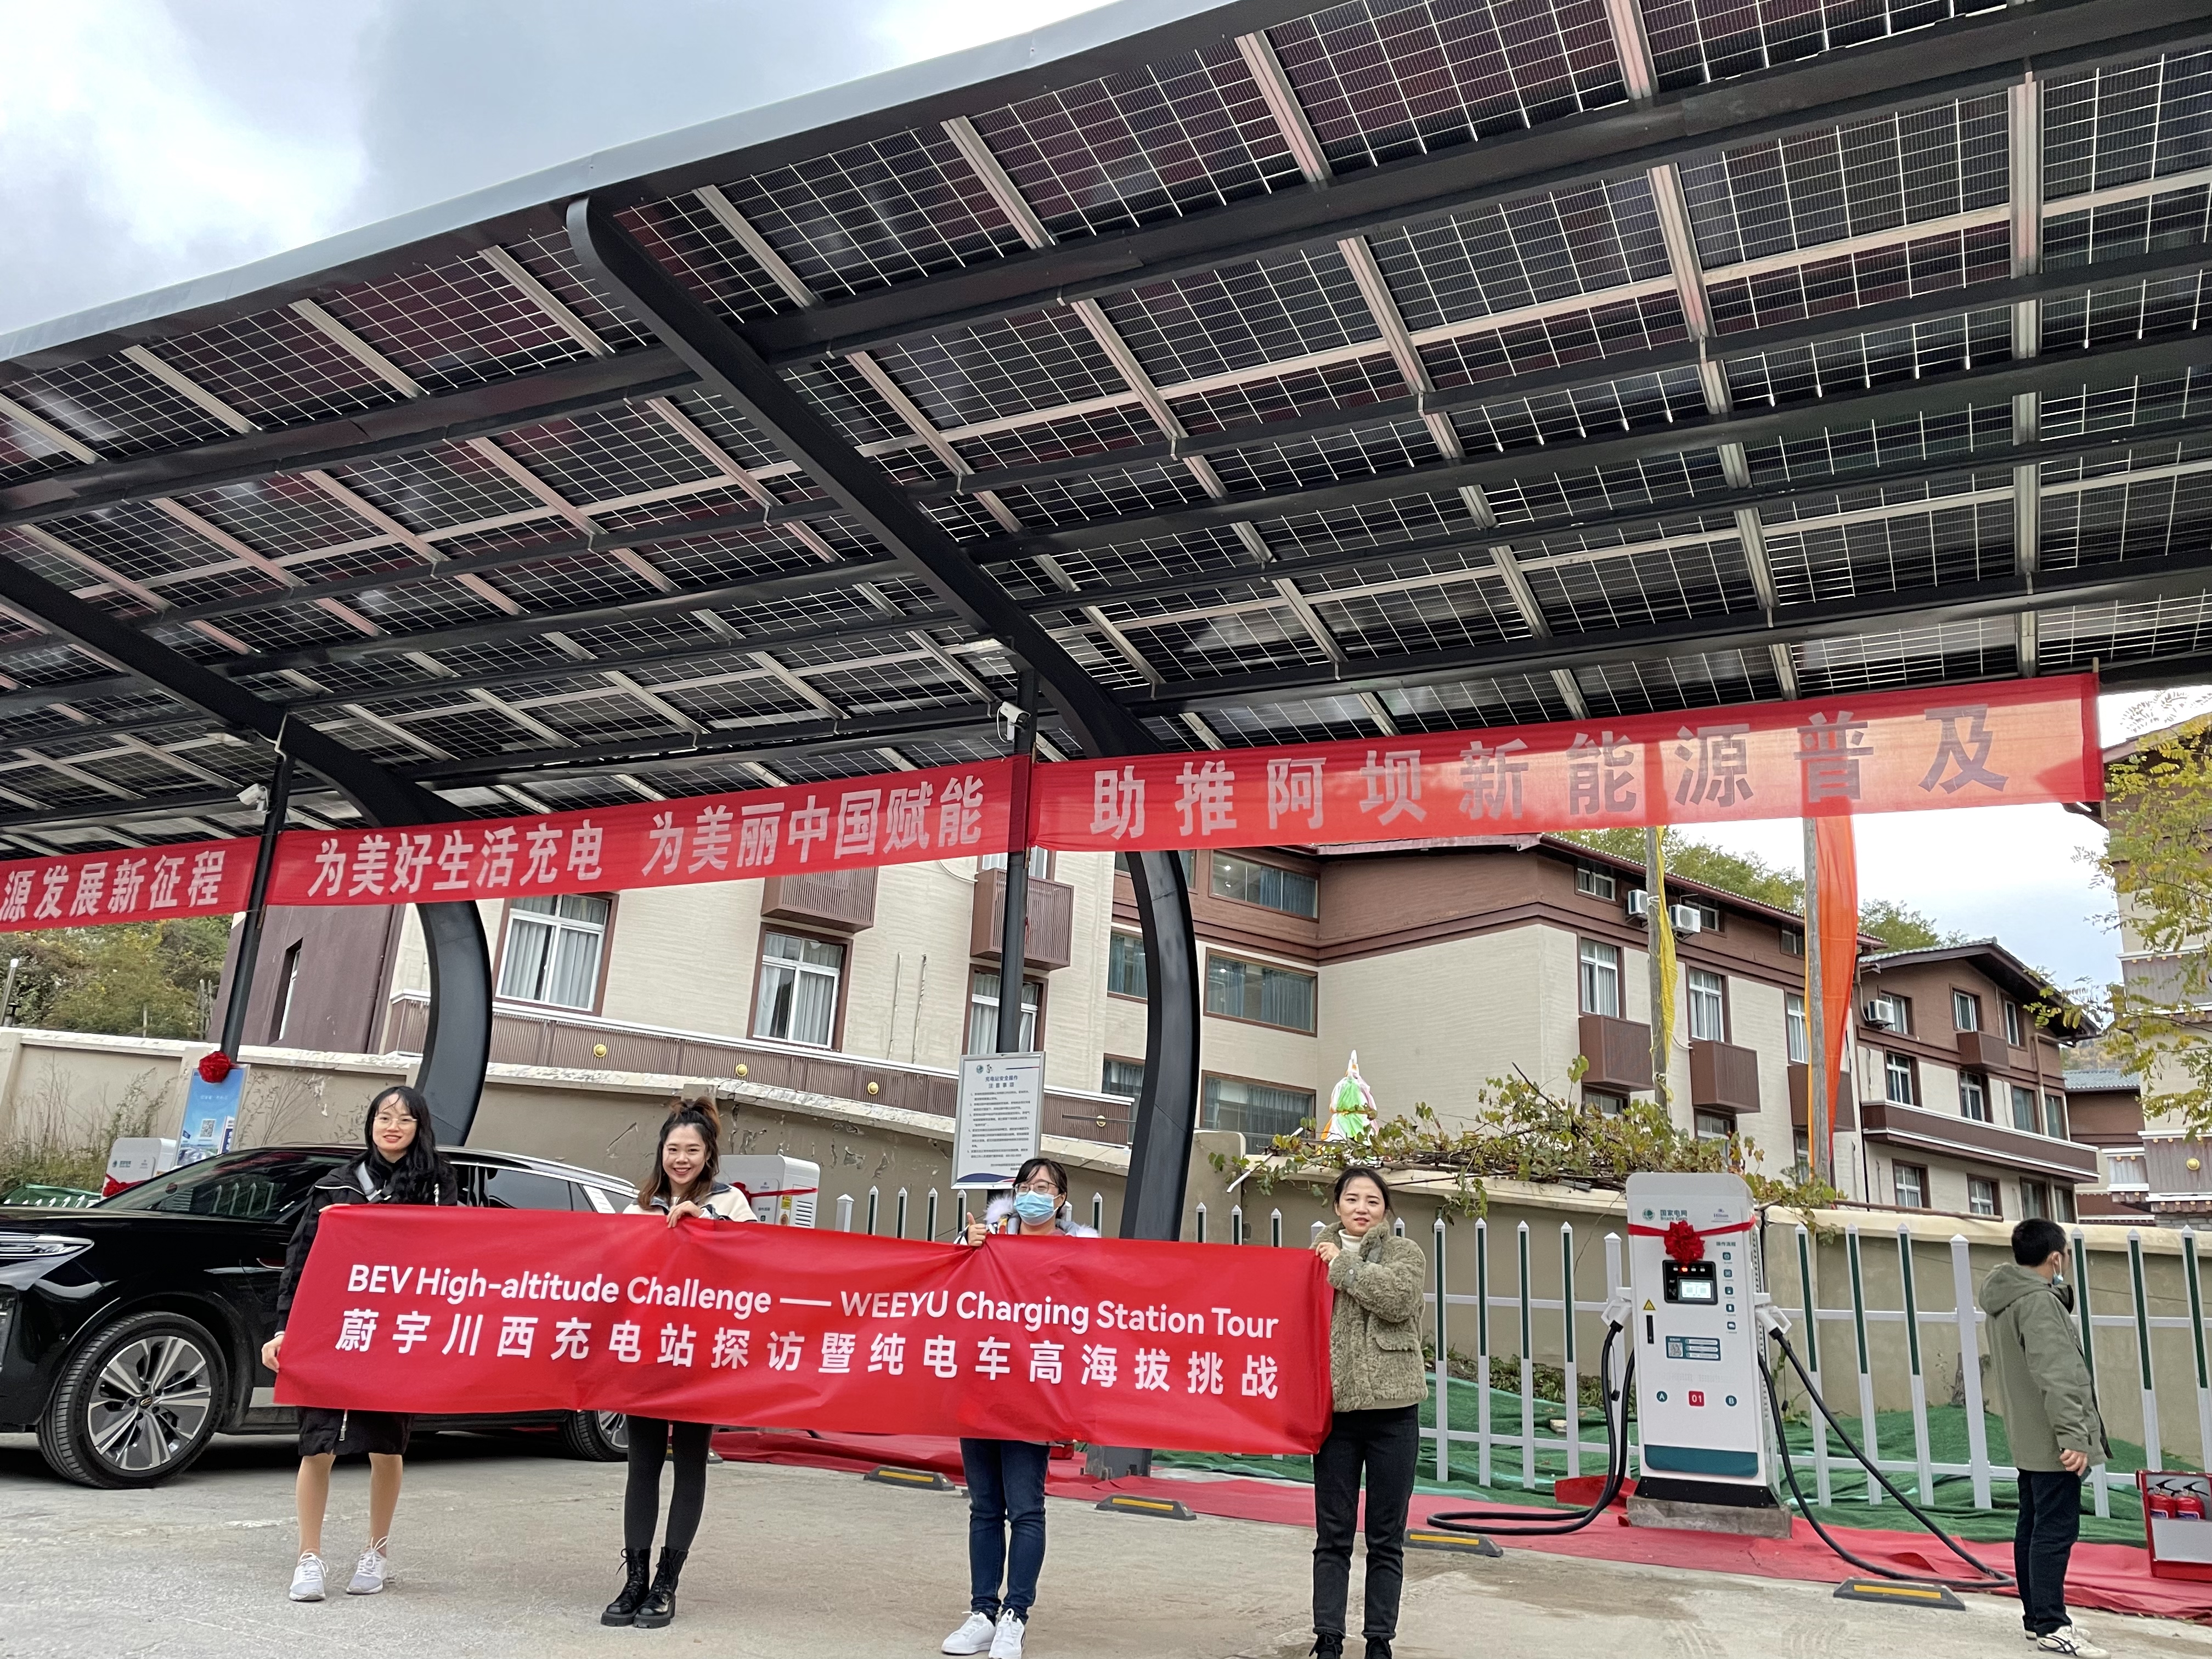 Weeyu charging station tour——High-altitude challenge of BEV